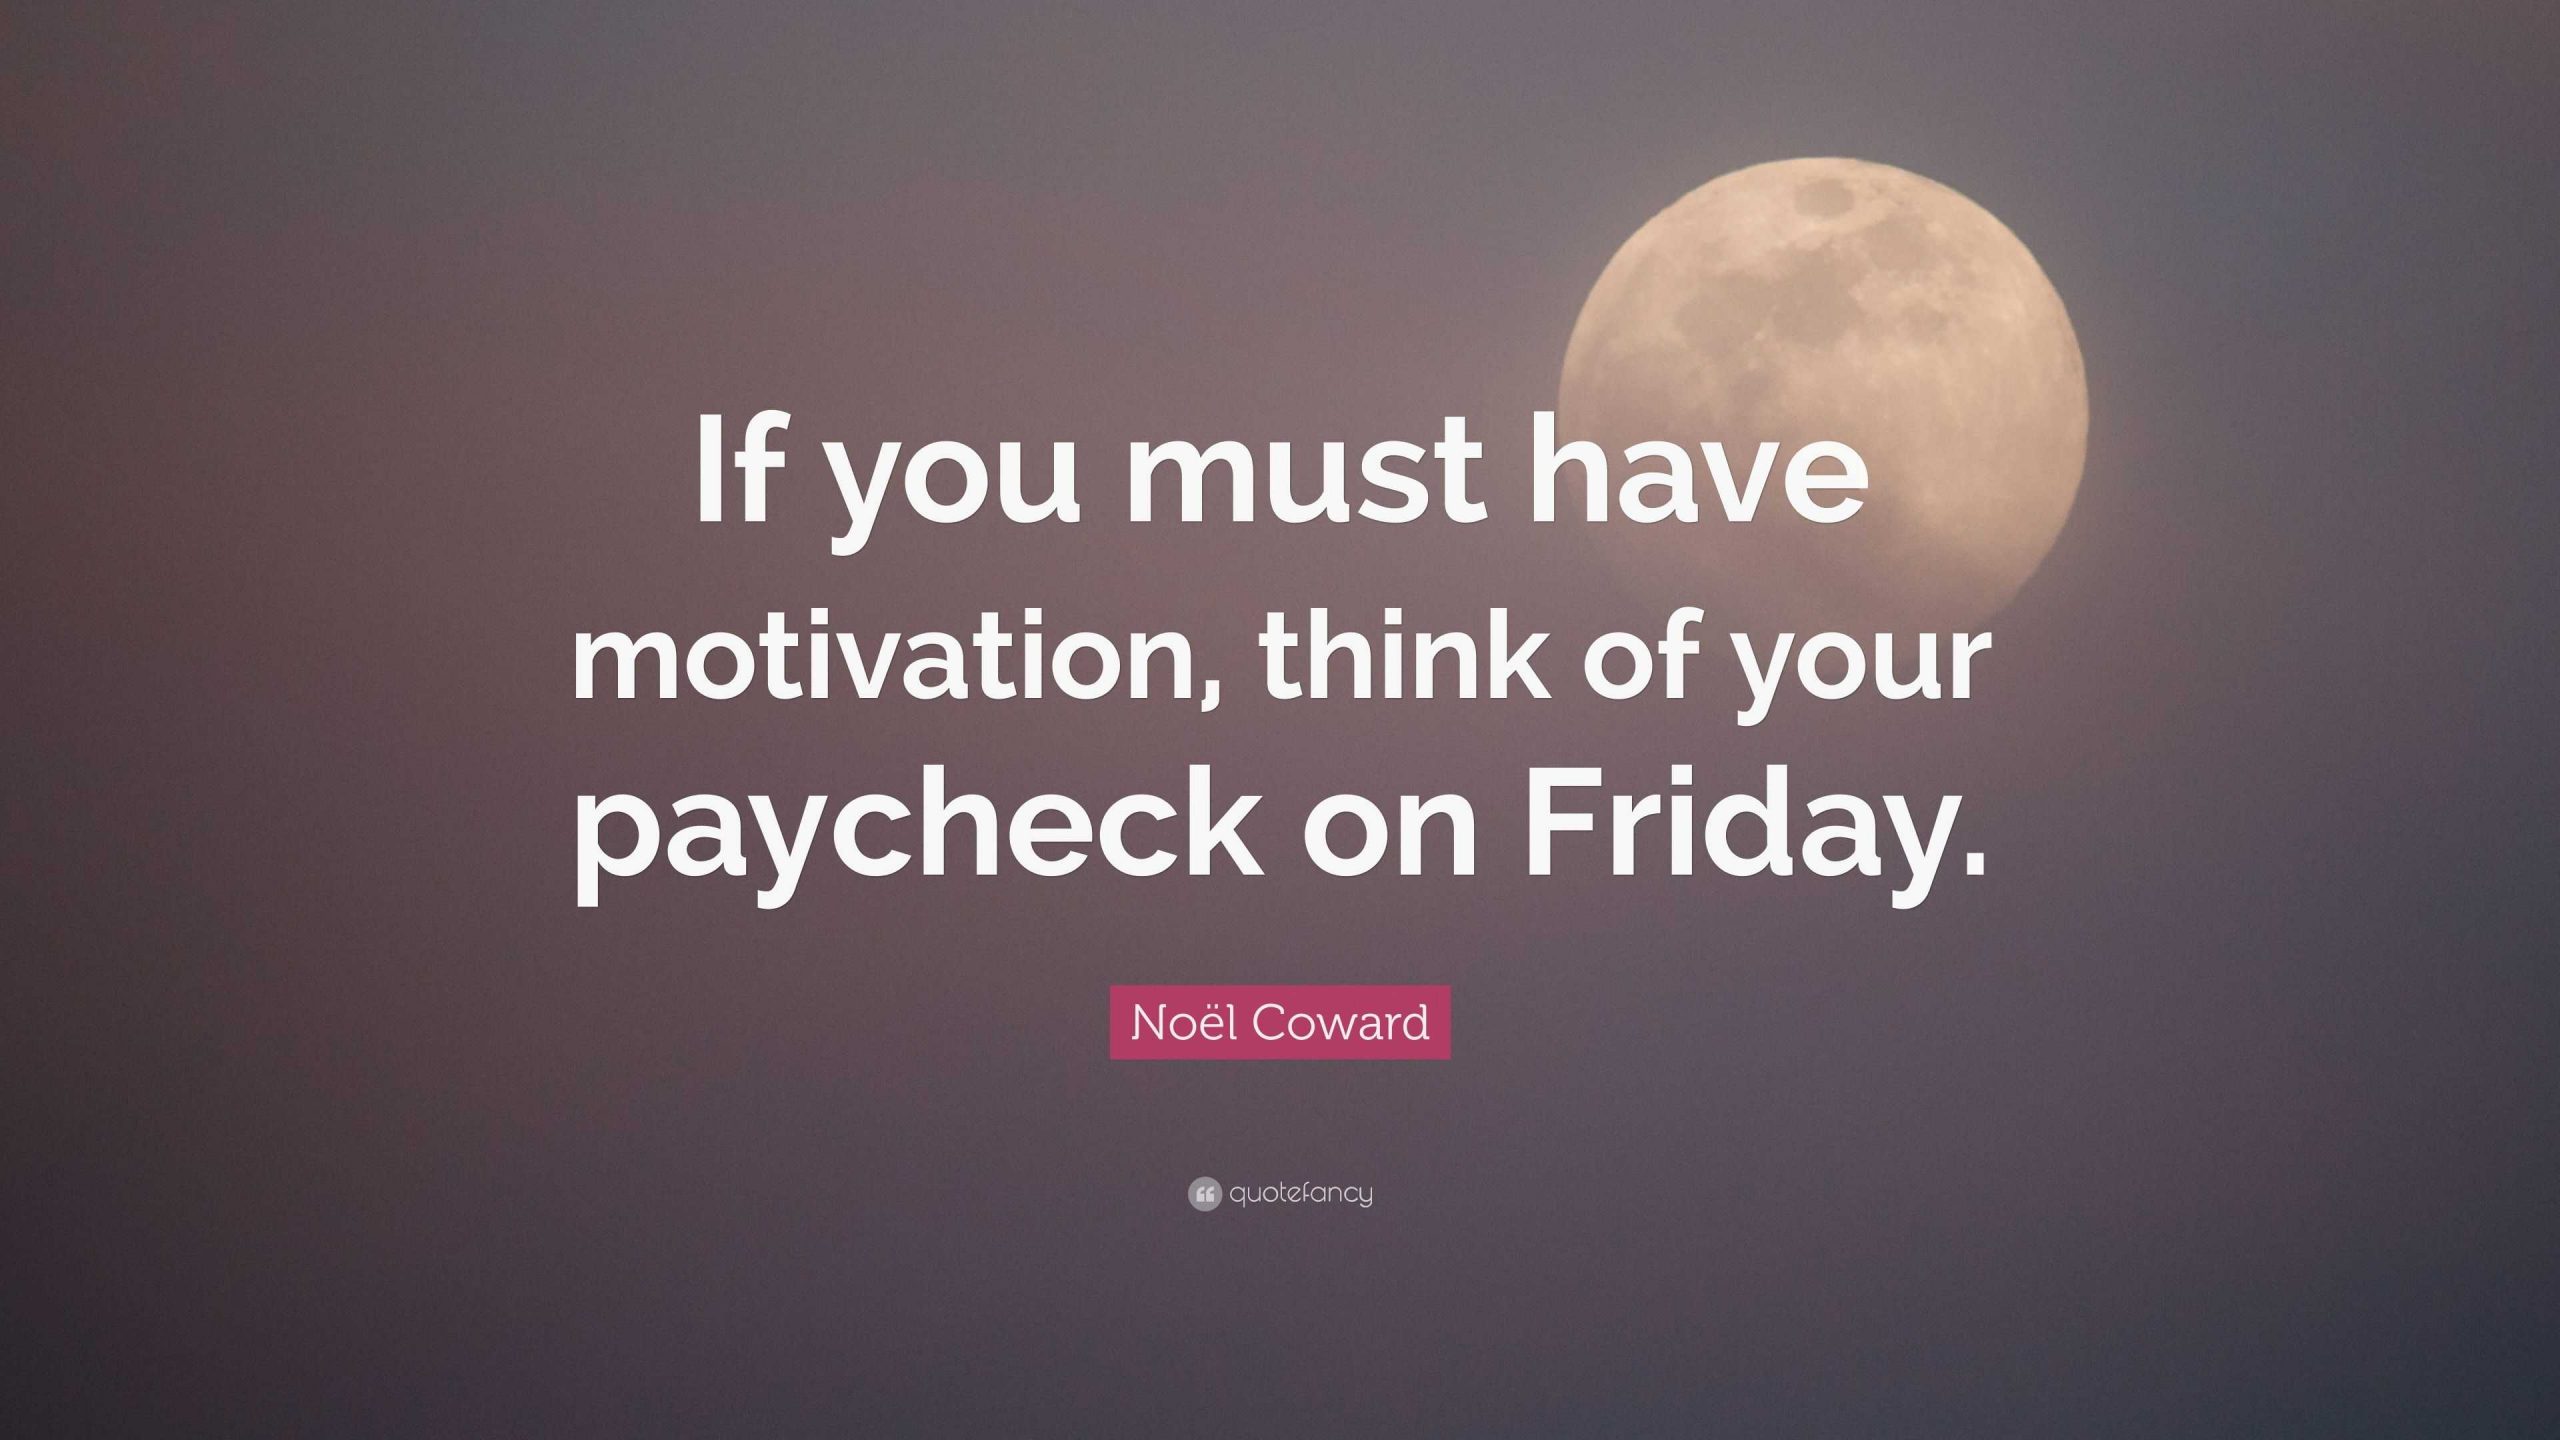 “If you must have motivation, think of your paycheck on Friday.” – Noel Coward